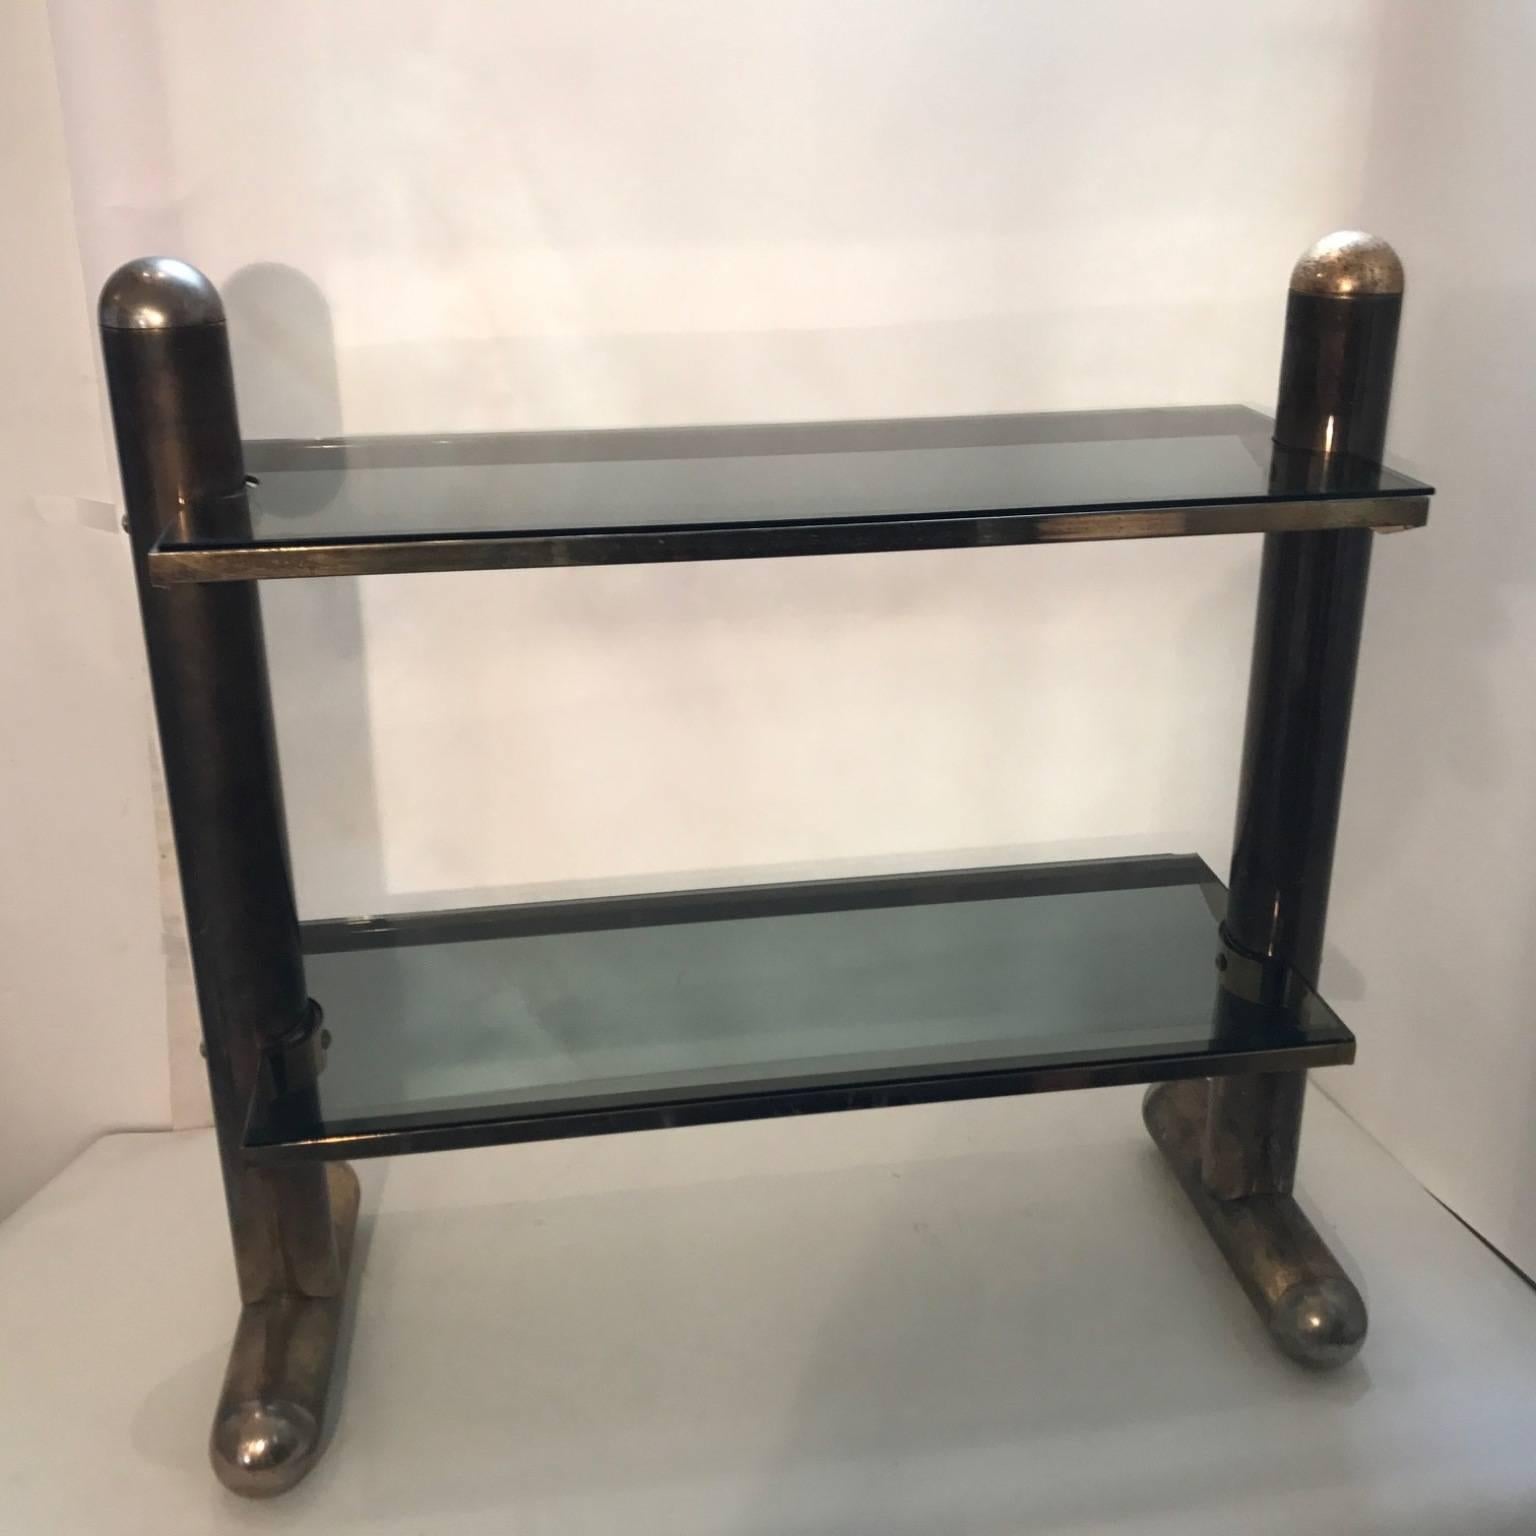 This unusual console or table with in two tiers of the smoked glass shelves and the combination of chrome endings and frame in antique polished metal.By Belgo chrome, Belgium, circa 1970s.